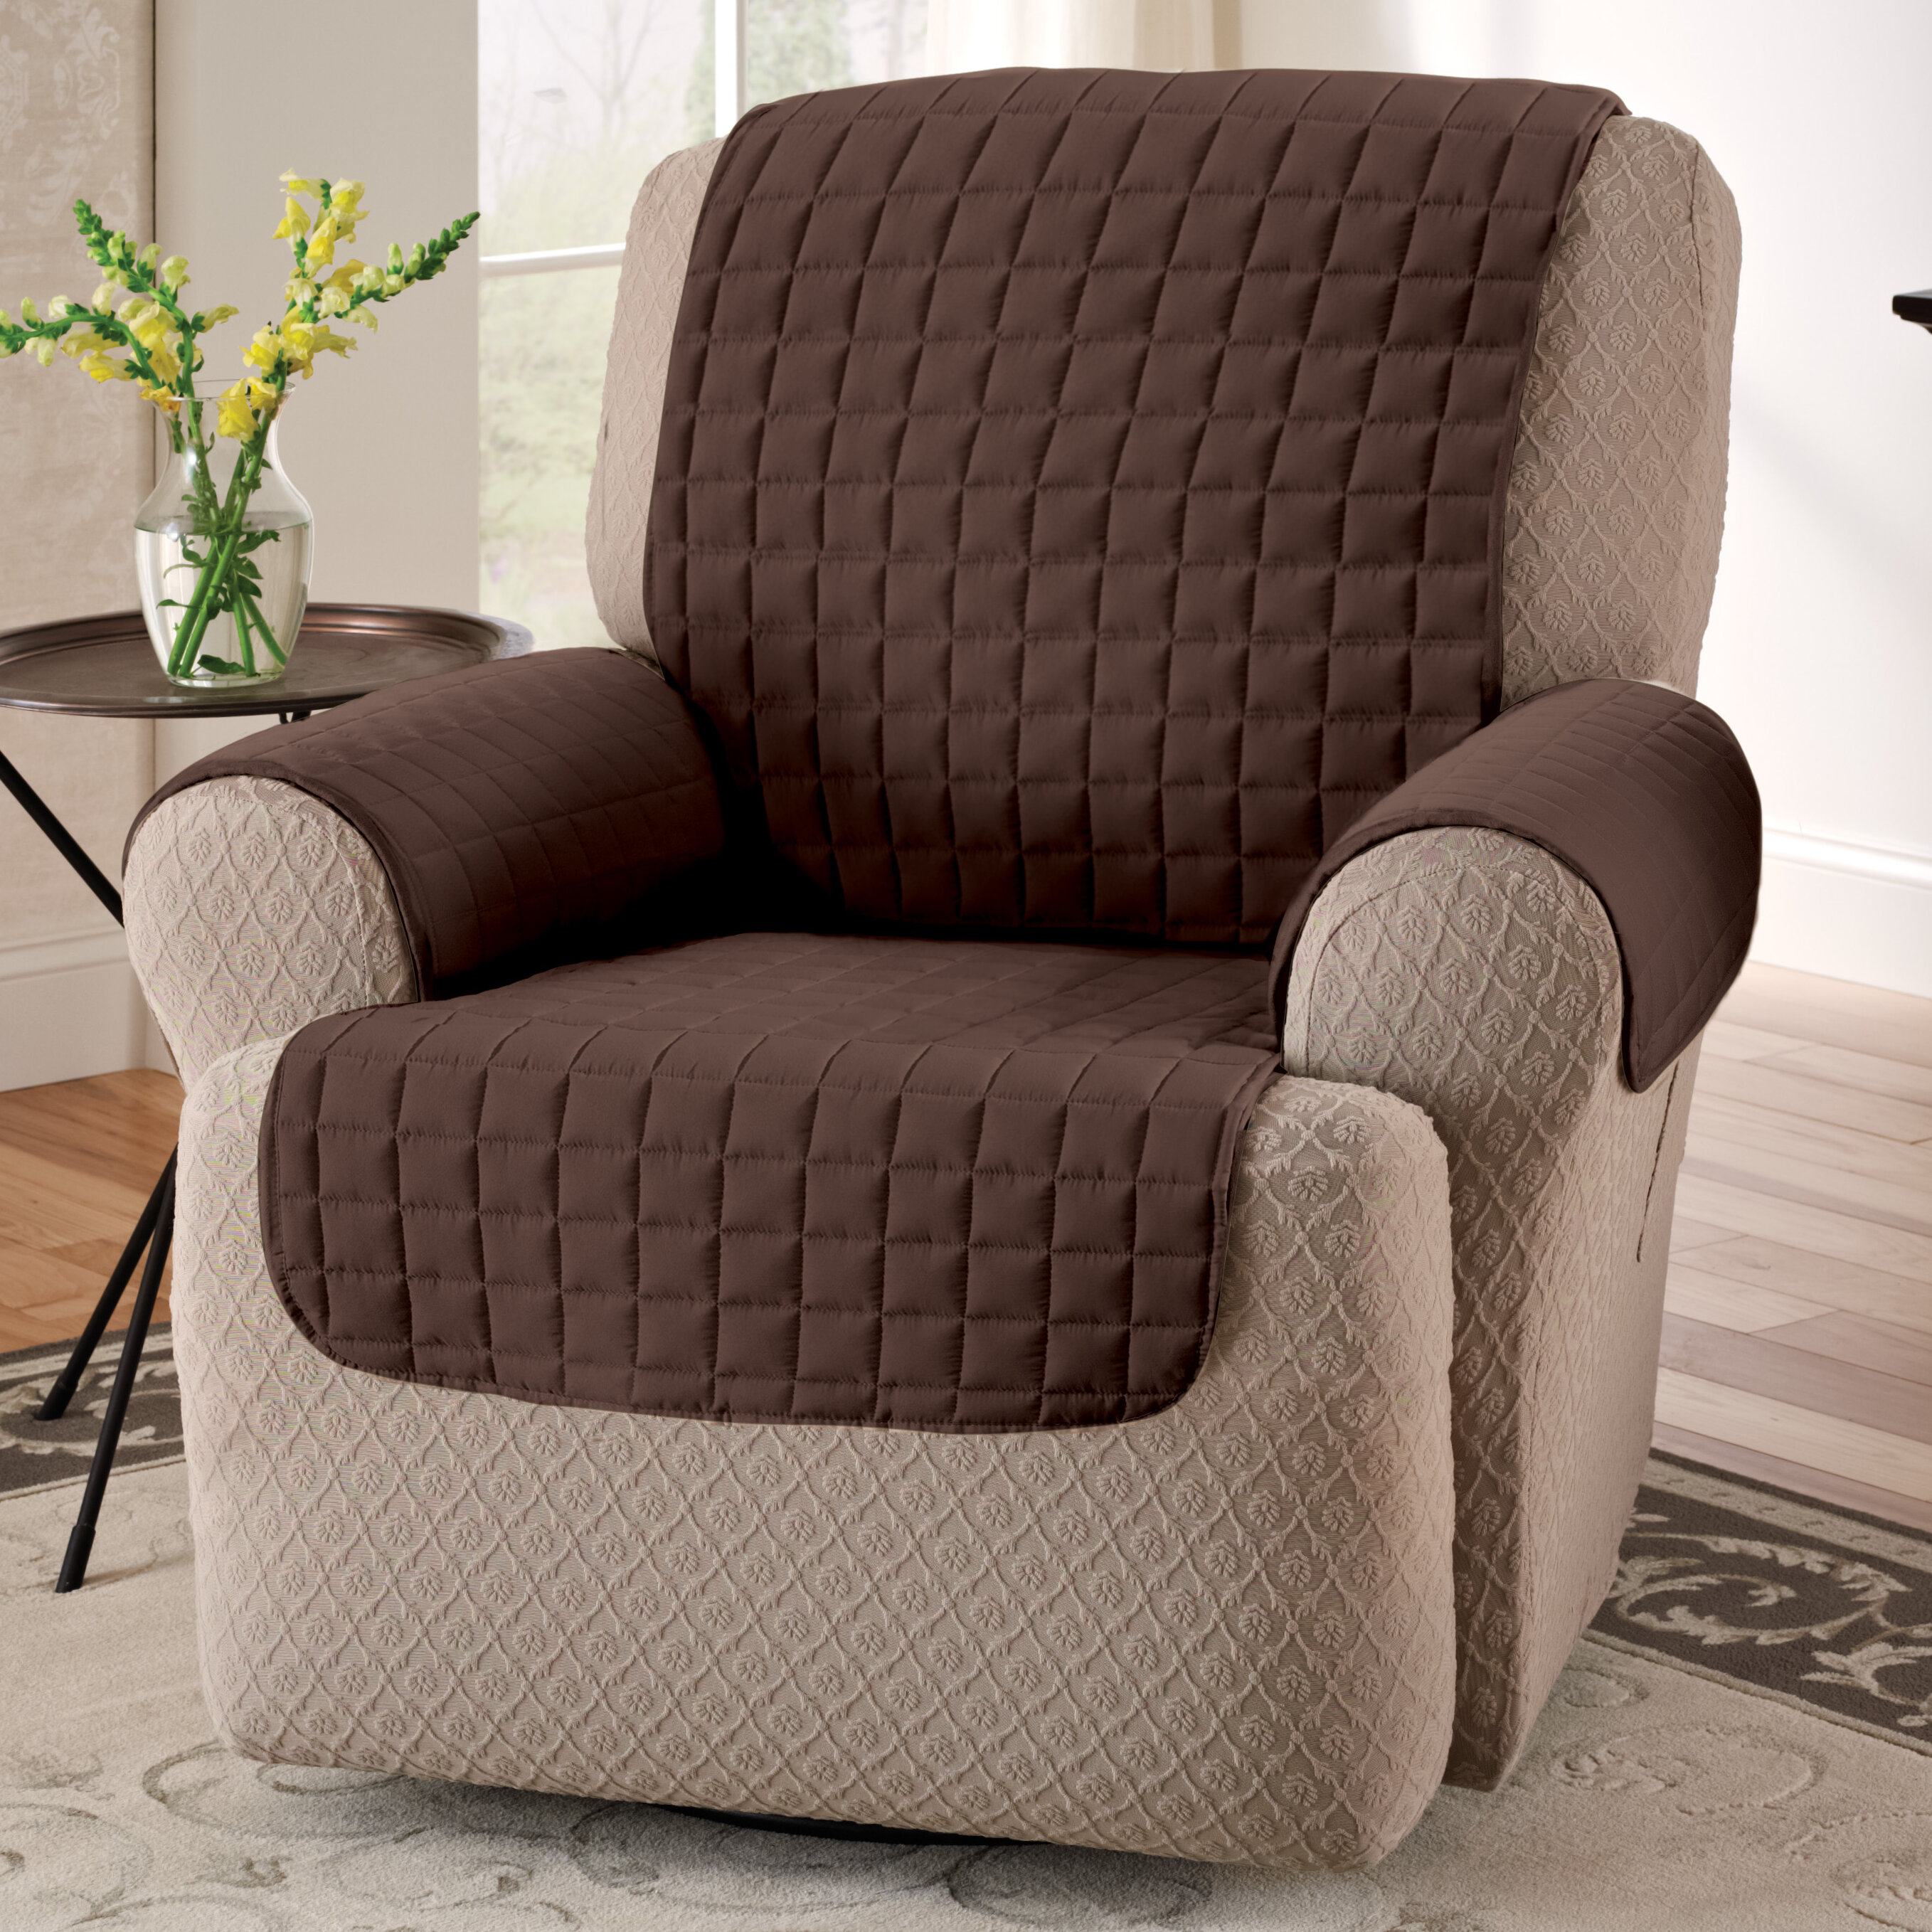 1-Piece Form Fit Stretch Furniture Protector Recliner Chair Cover Сappuccino Microfibra Collection Soft Polyester Fabric Slipcover Recliner Recliner Slipcover 